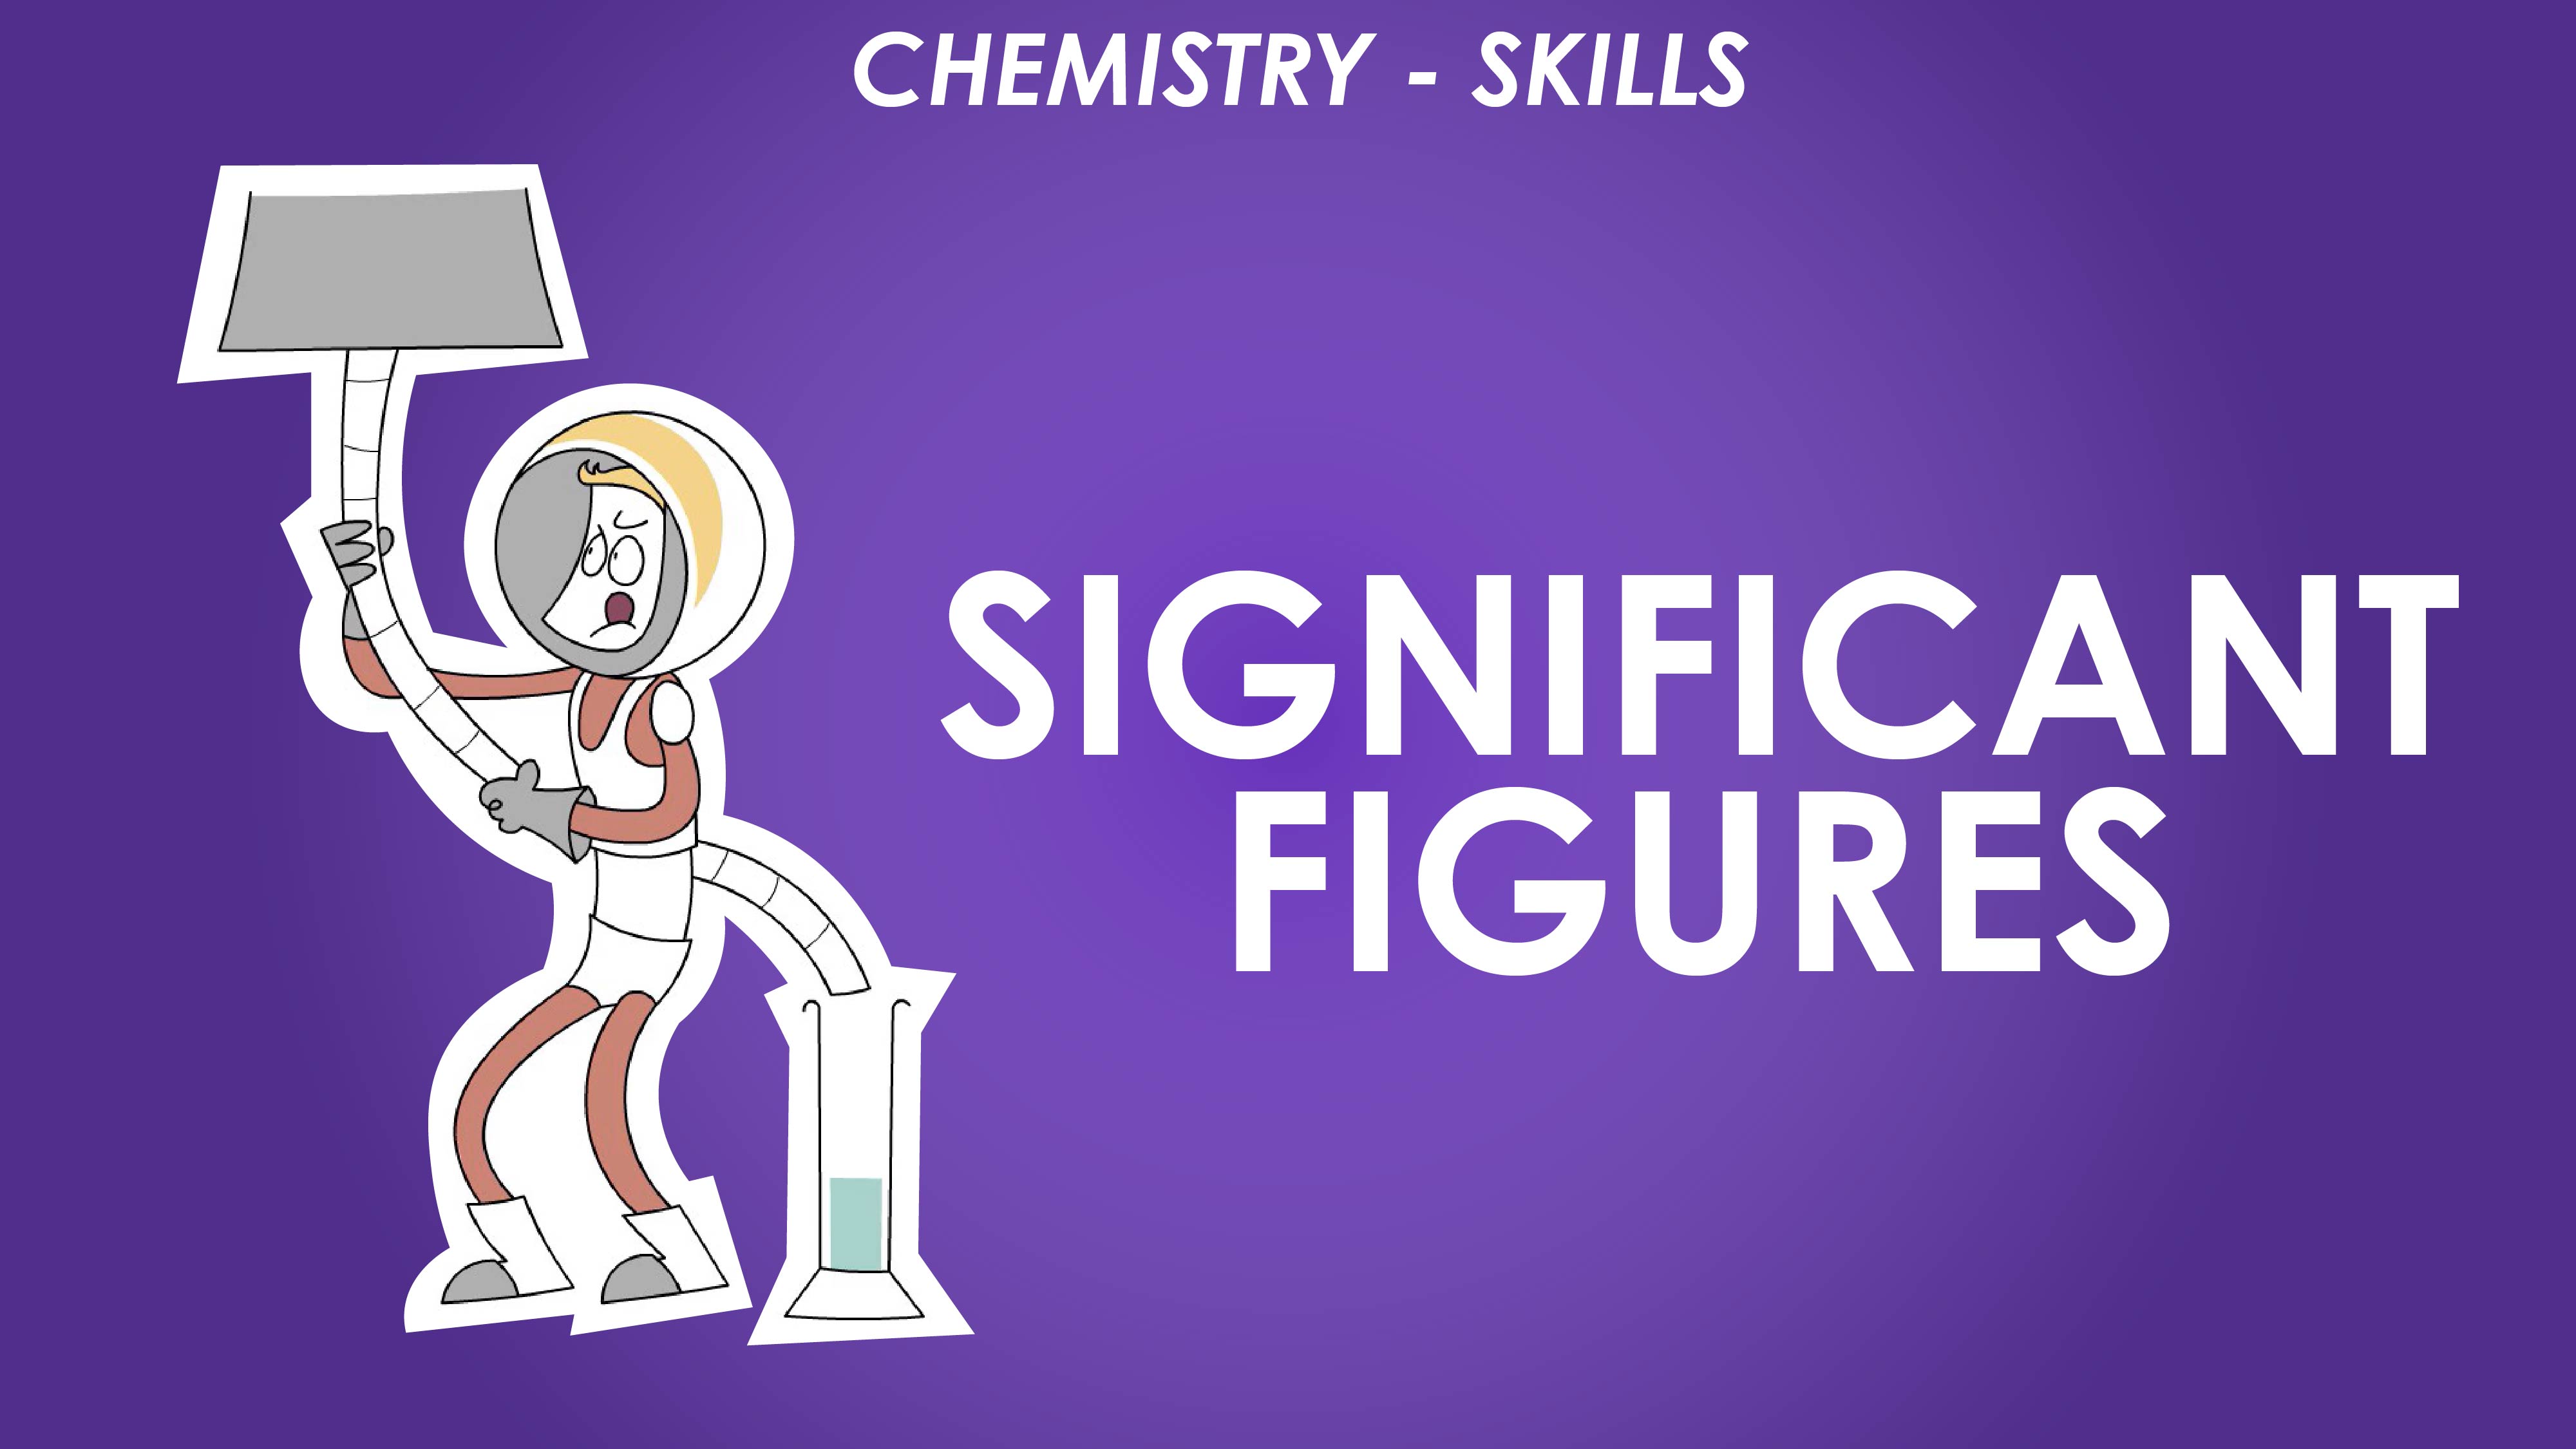 Significant Figures - Chemistry Skills